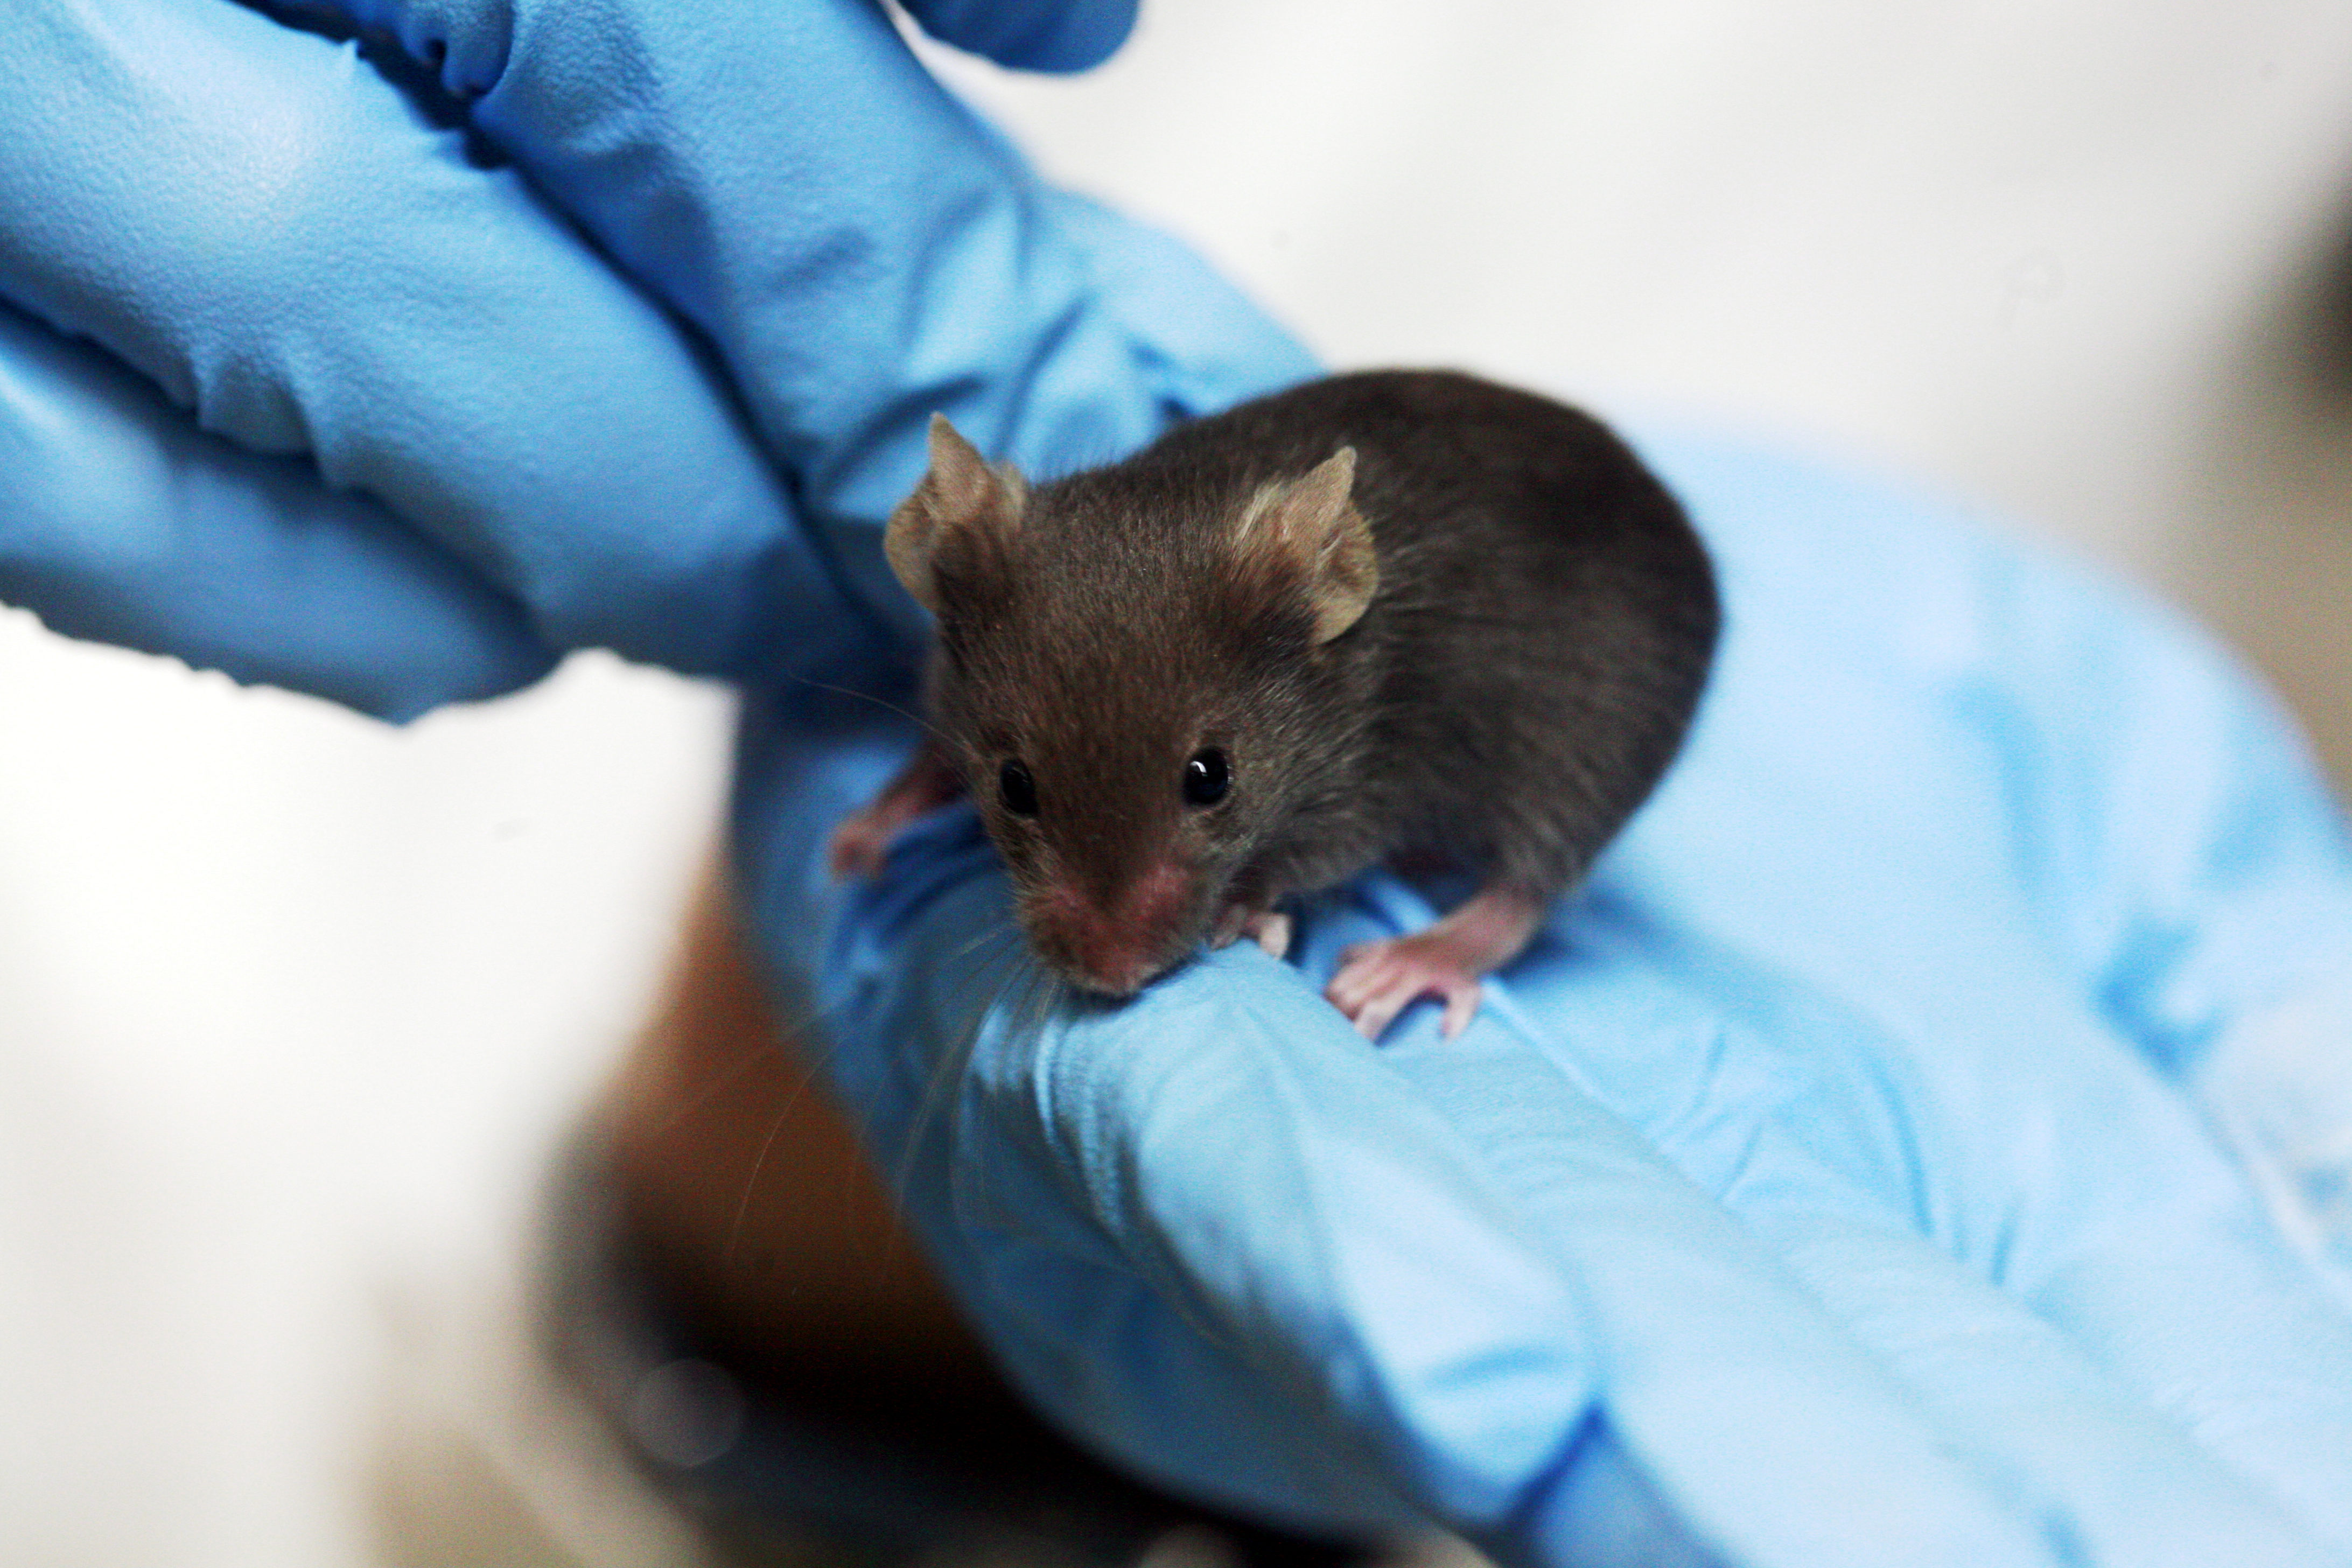 Study in Mice Suggests That Covid-19 Increases Risk of Developing Parkinson’s Disease